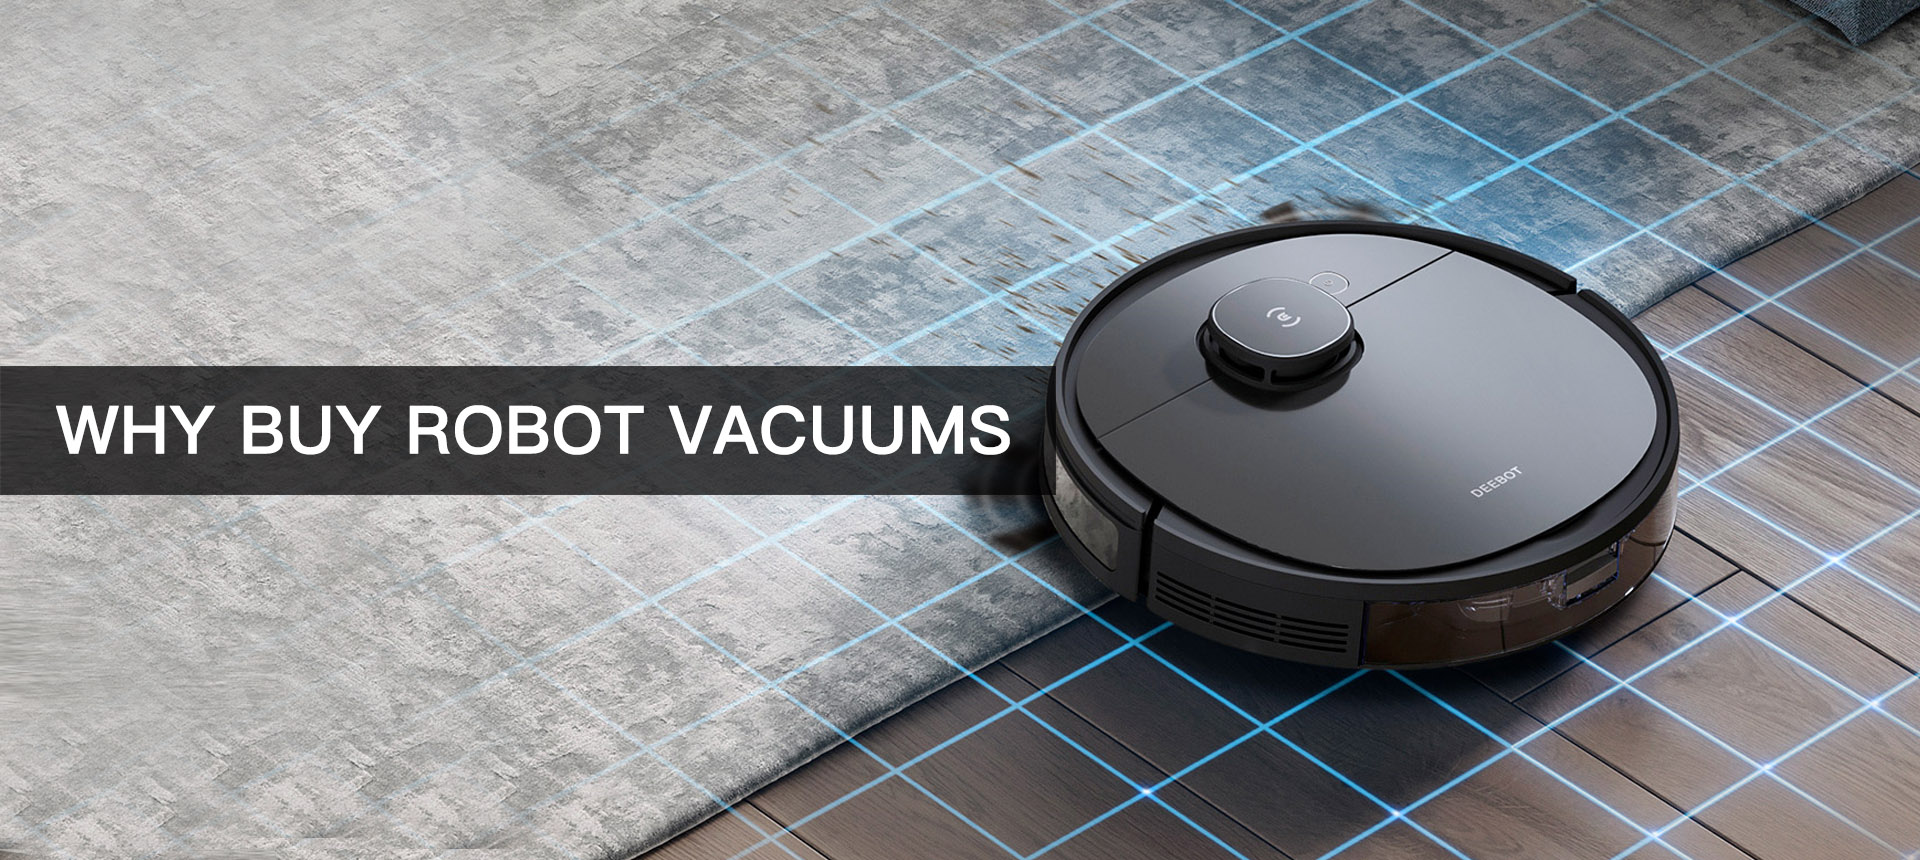 Why Buy Robot Vacuums